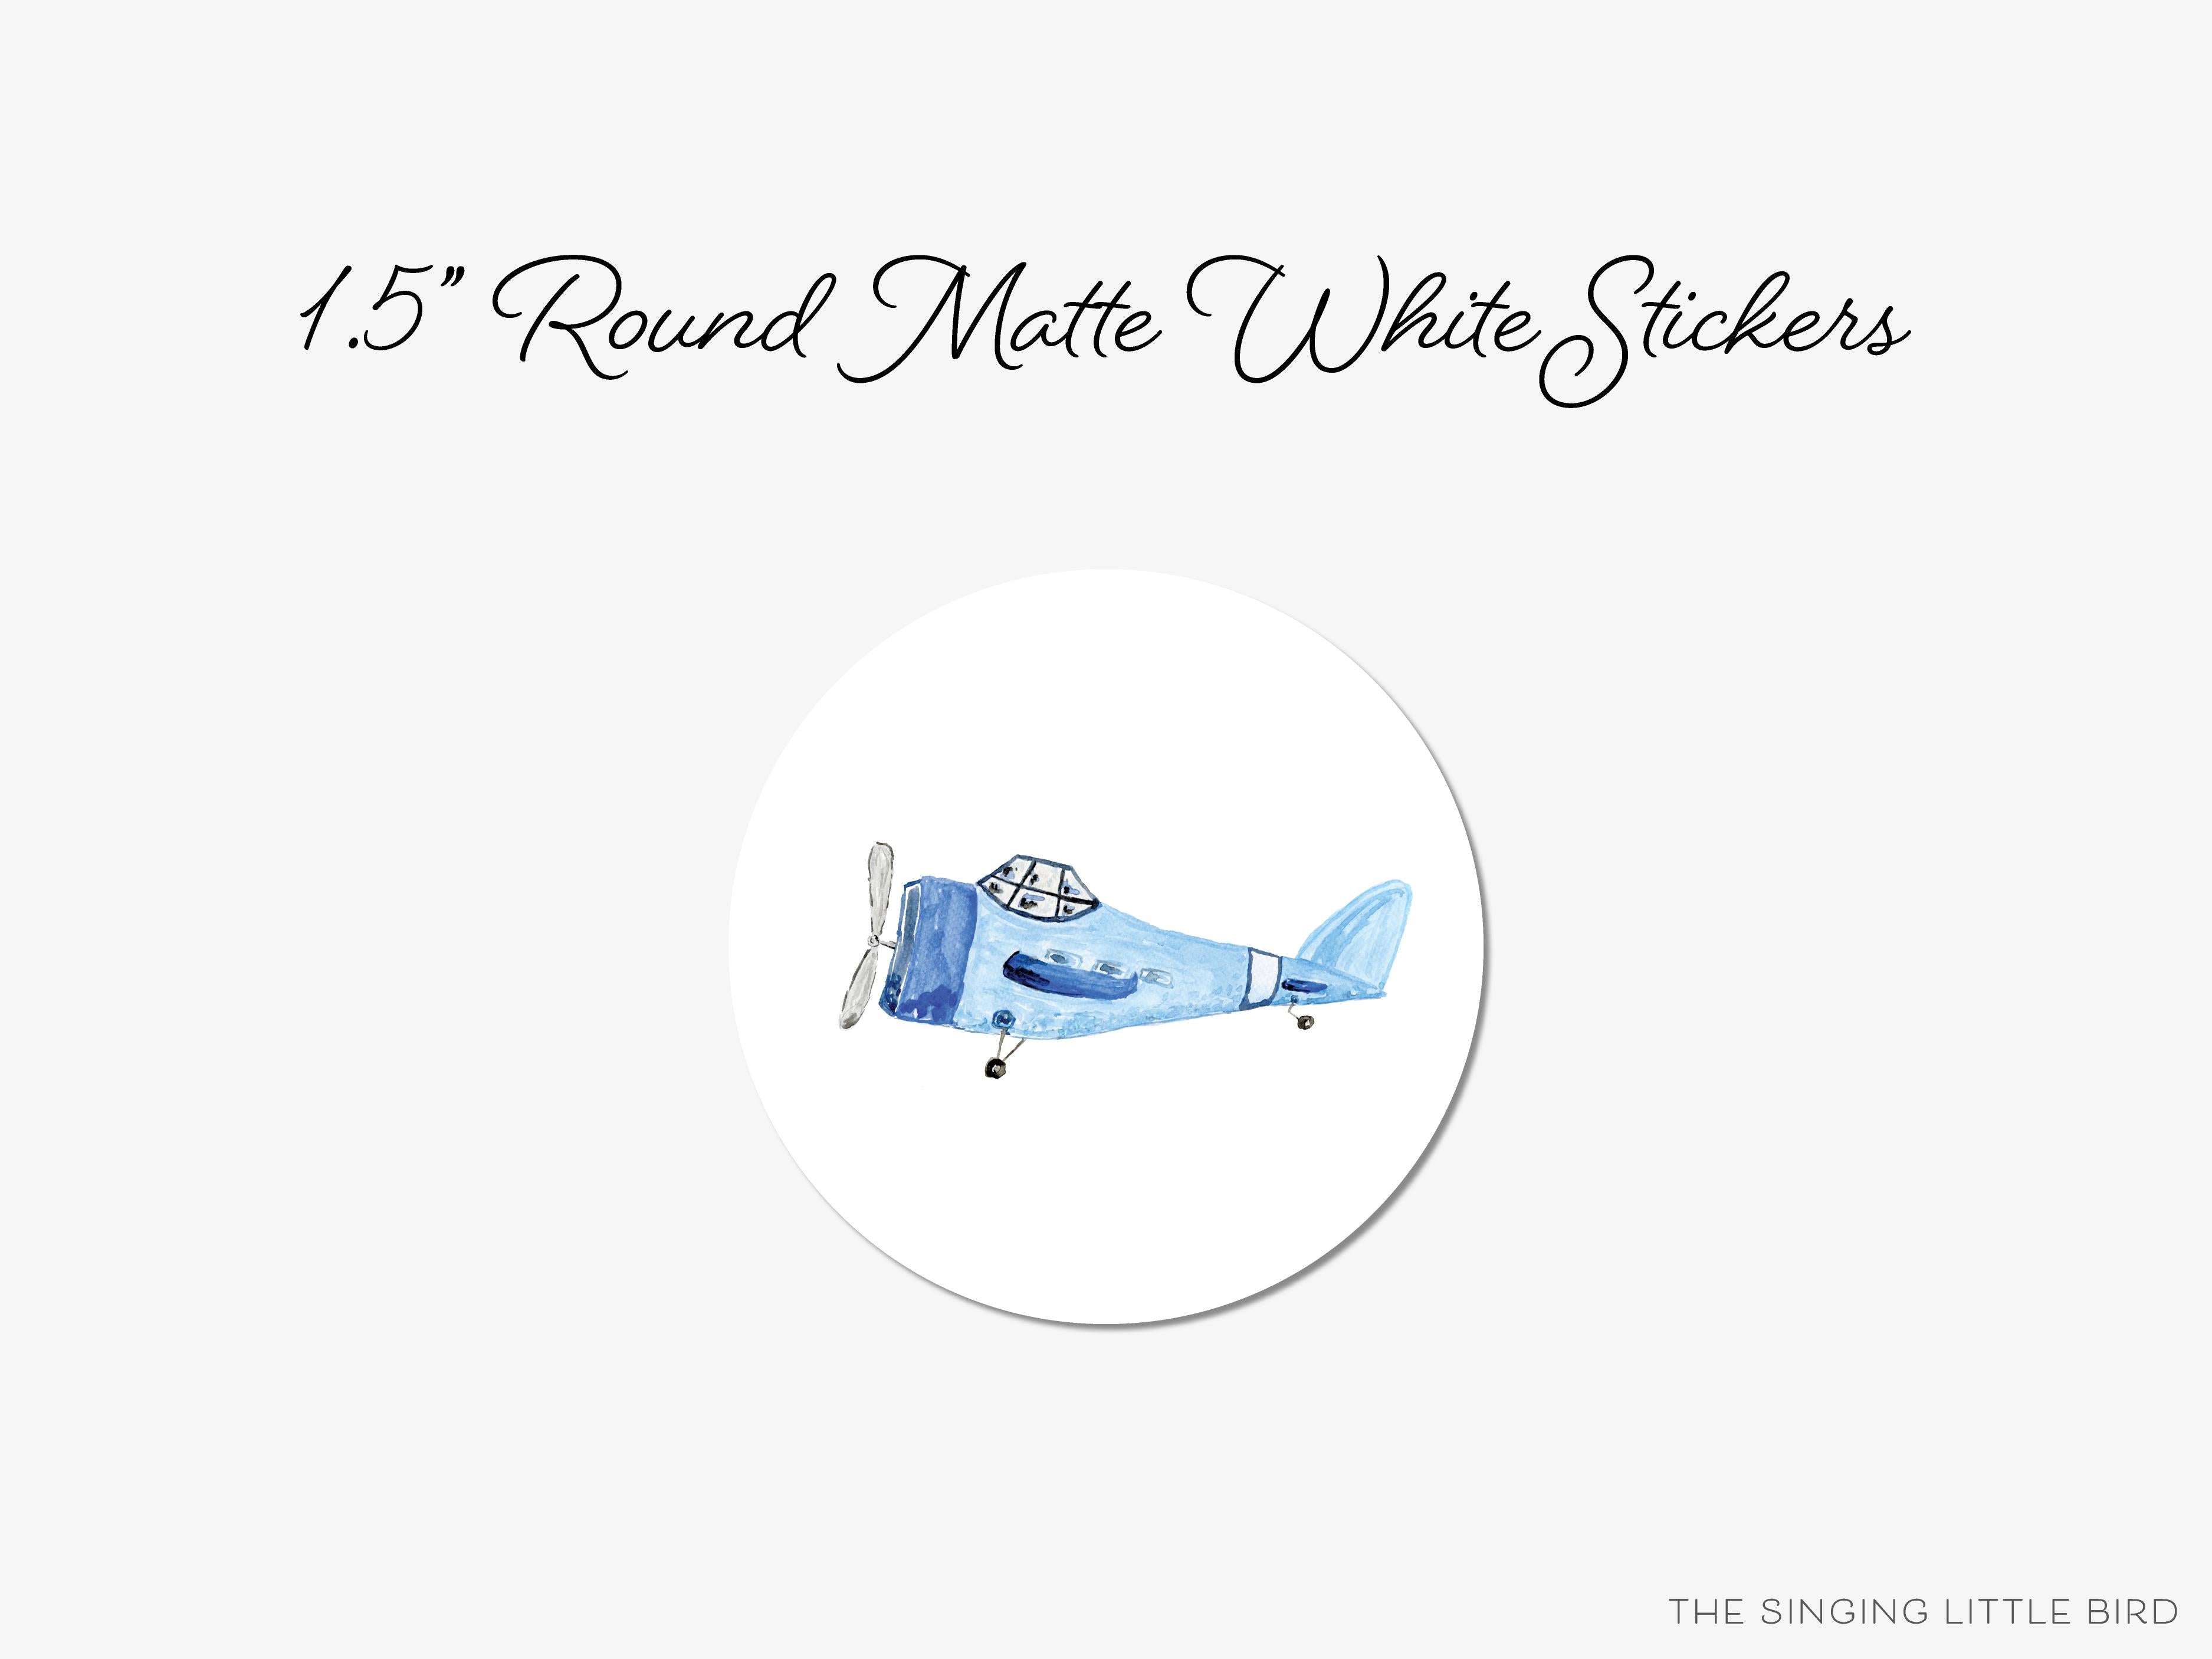 Vintage Airplane Round Stickers-These matte round stickers feature our hand-painted watercolor Vintage Plane, making great envelope seals or gifts for the vintage lover in your life.-The Singing Little Bird